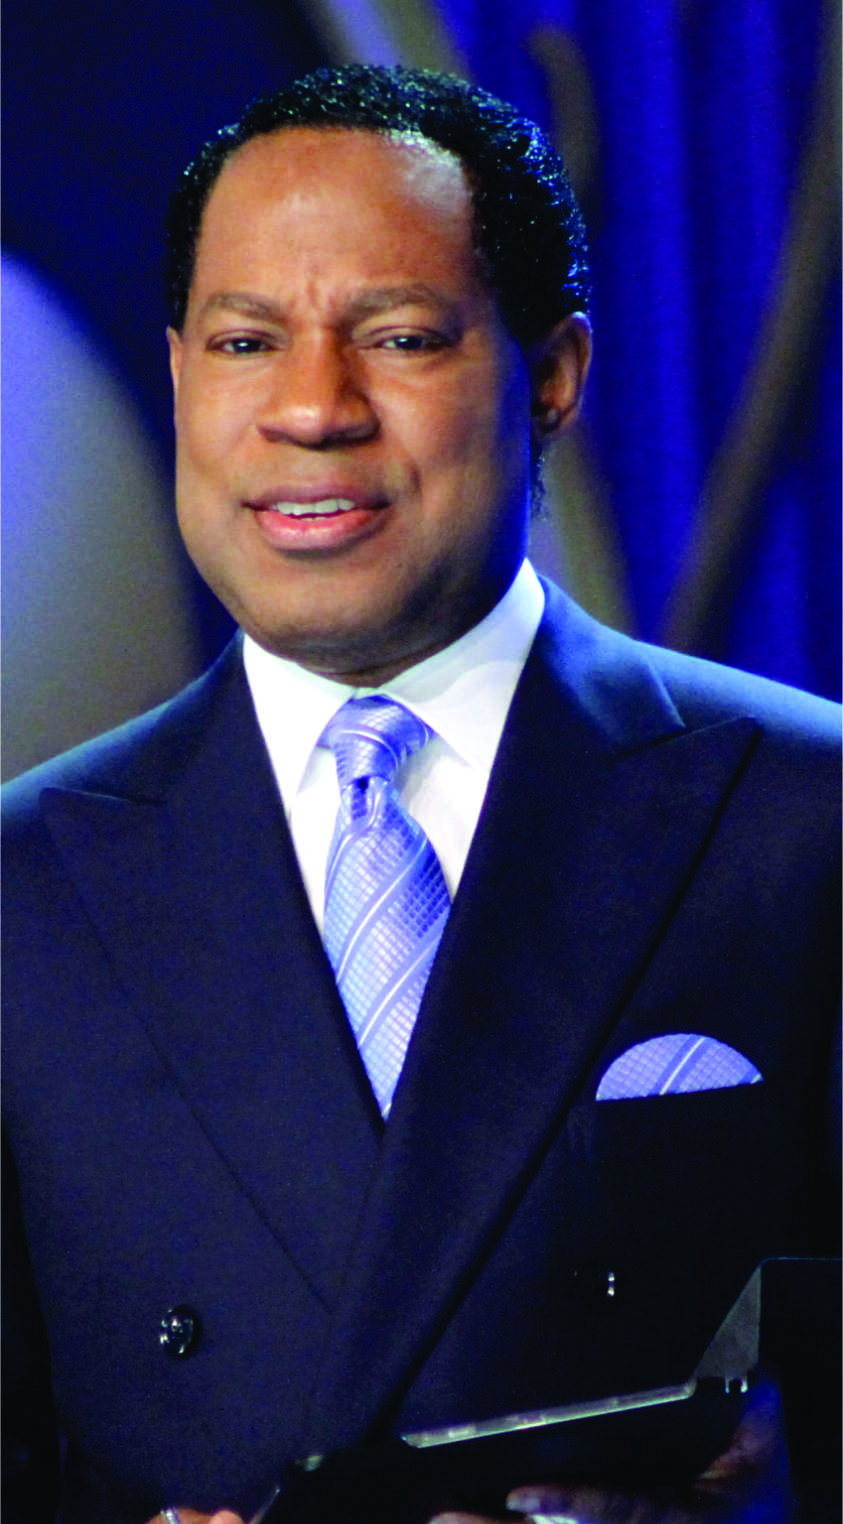 When over 40 million Ministers of the Gospel joined Pastor Chris in a Global Classroom